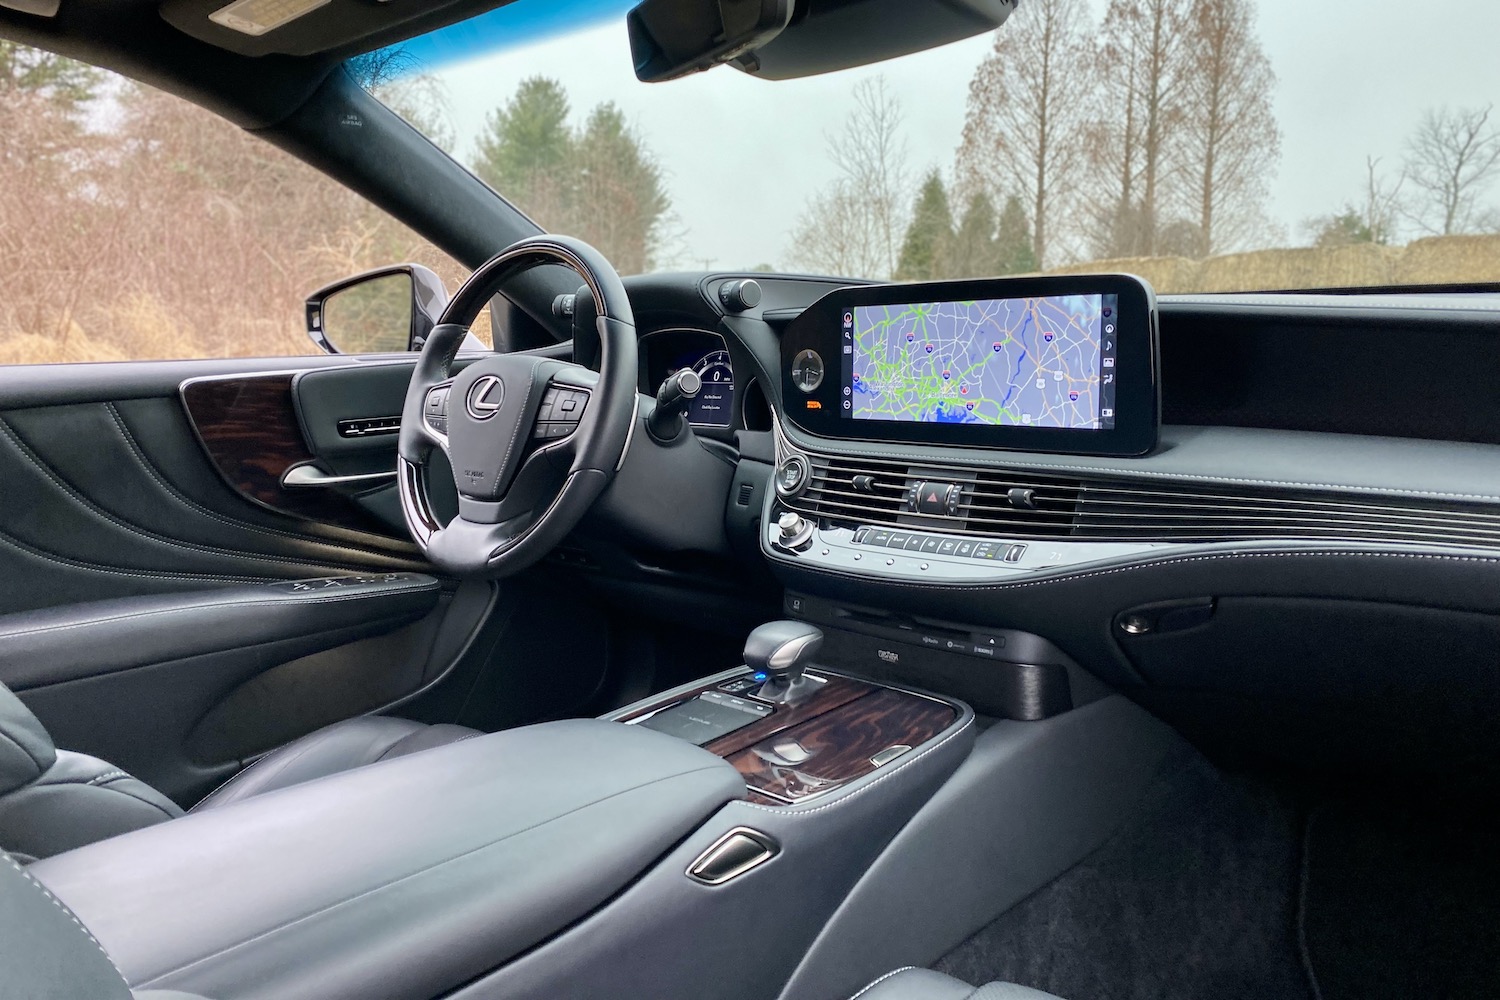 The dashboard and center console of the 2021 Lexus LS500 from rear seats.